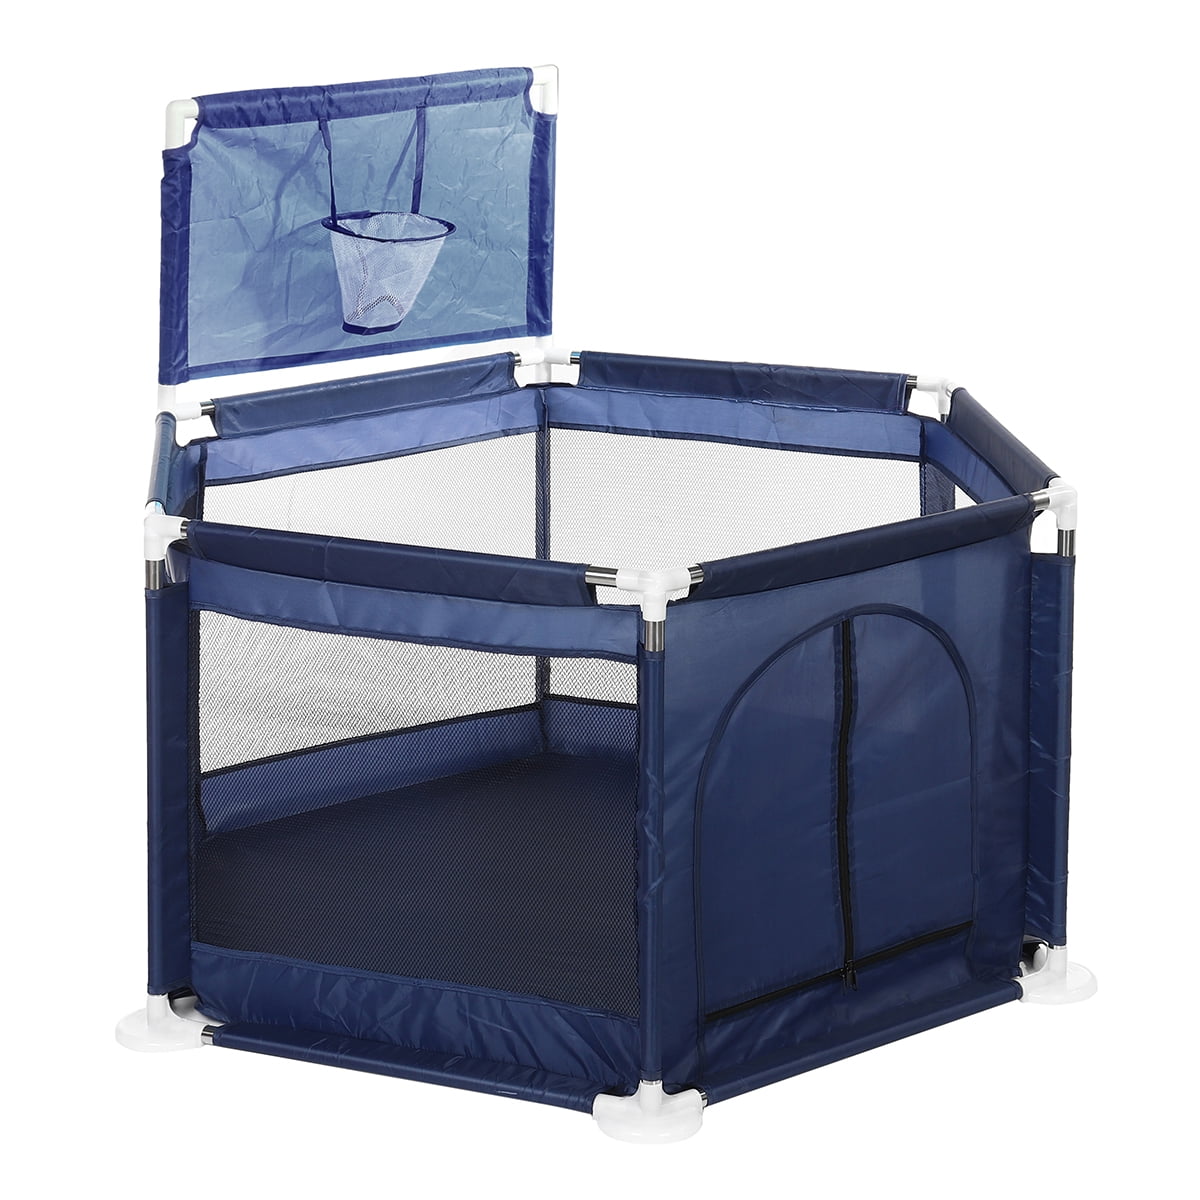 Baby Playpen by 6 Sides with Round Zipper Door Play Pen 18 Pole for Free 10 Ball 